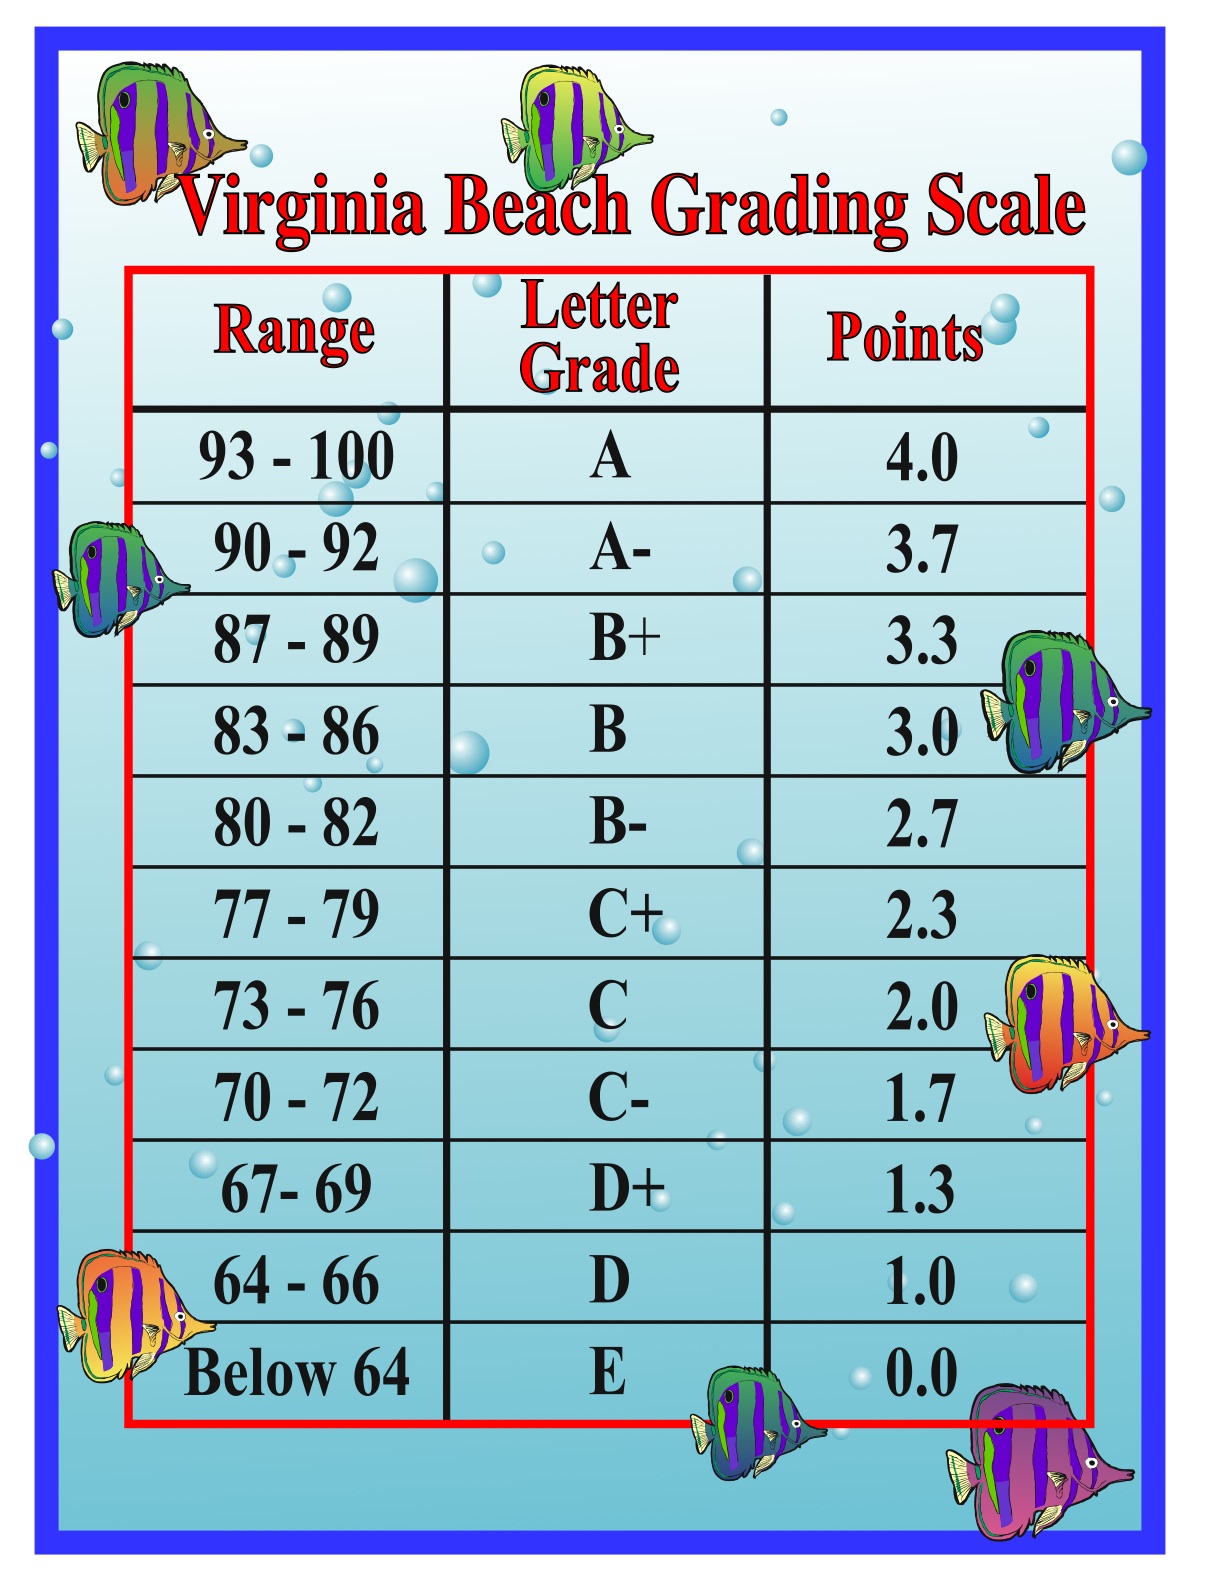 Conversion Chart For Standards Based Grading